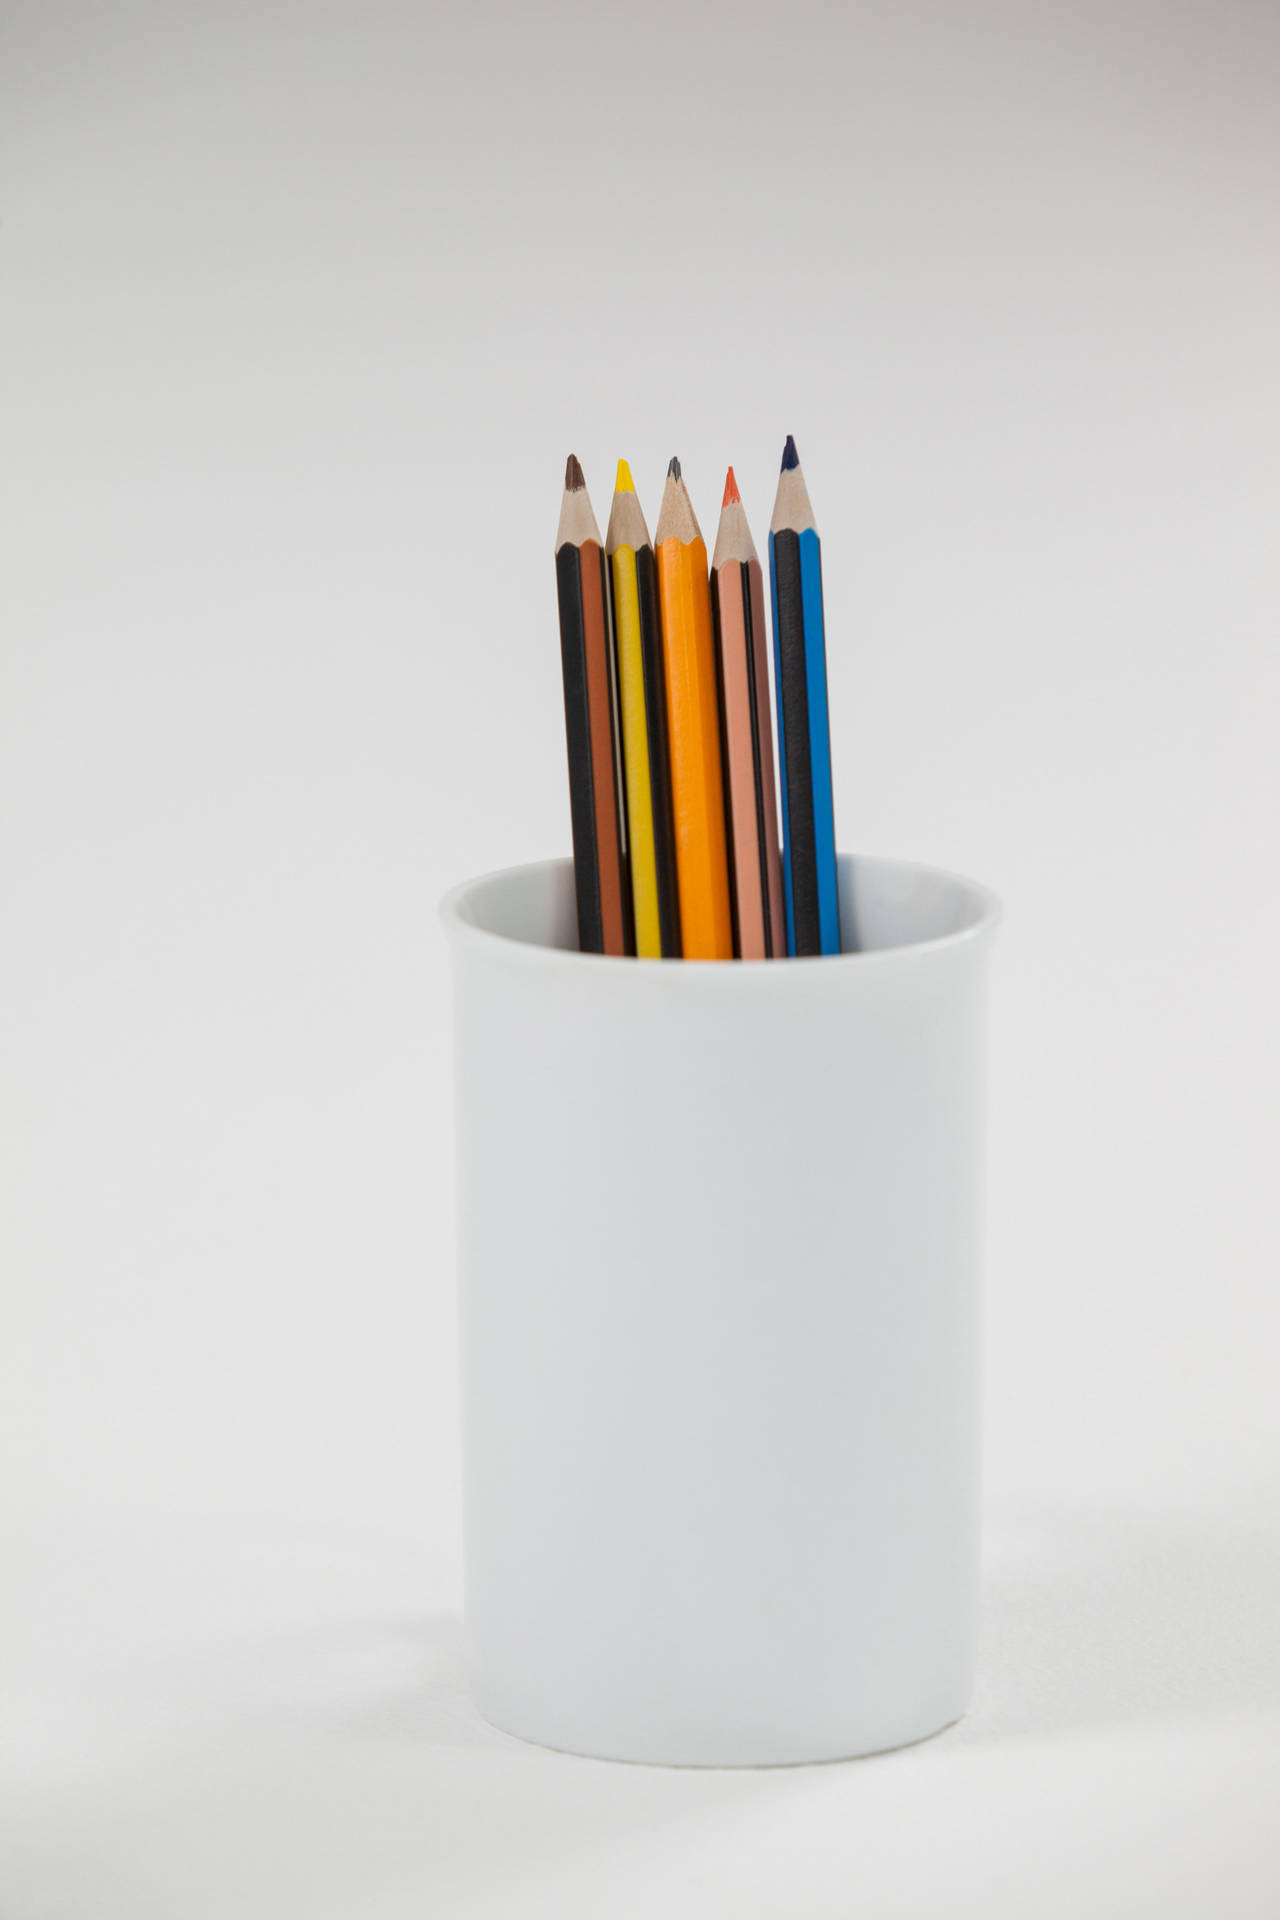 Cup Of Pencils For Art Study